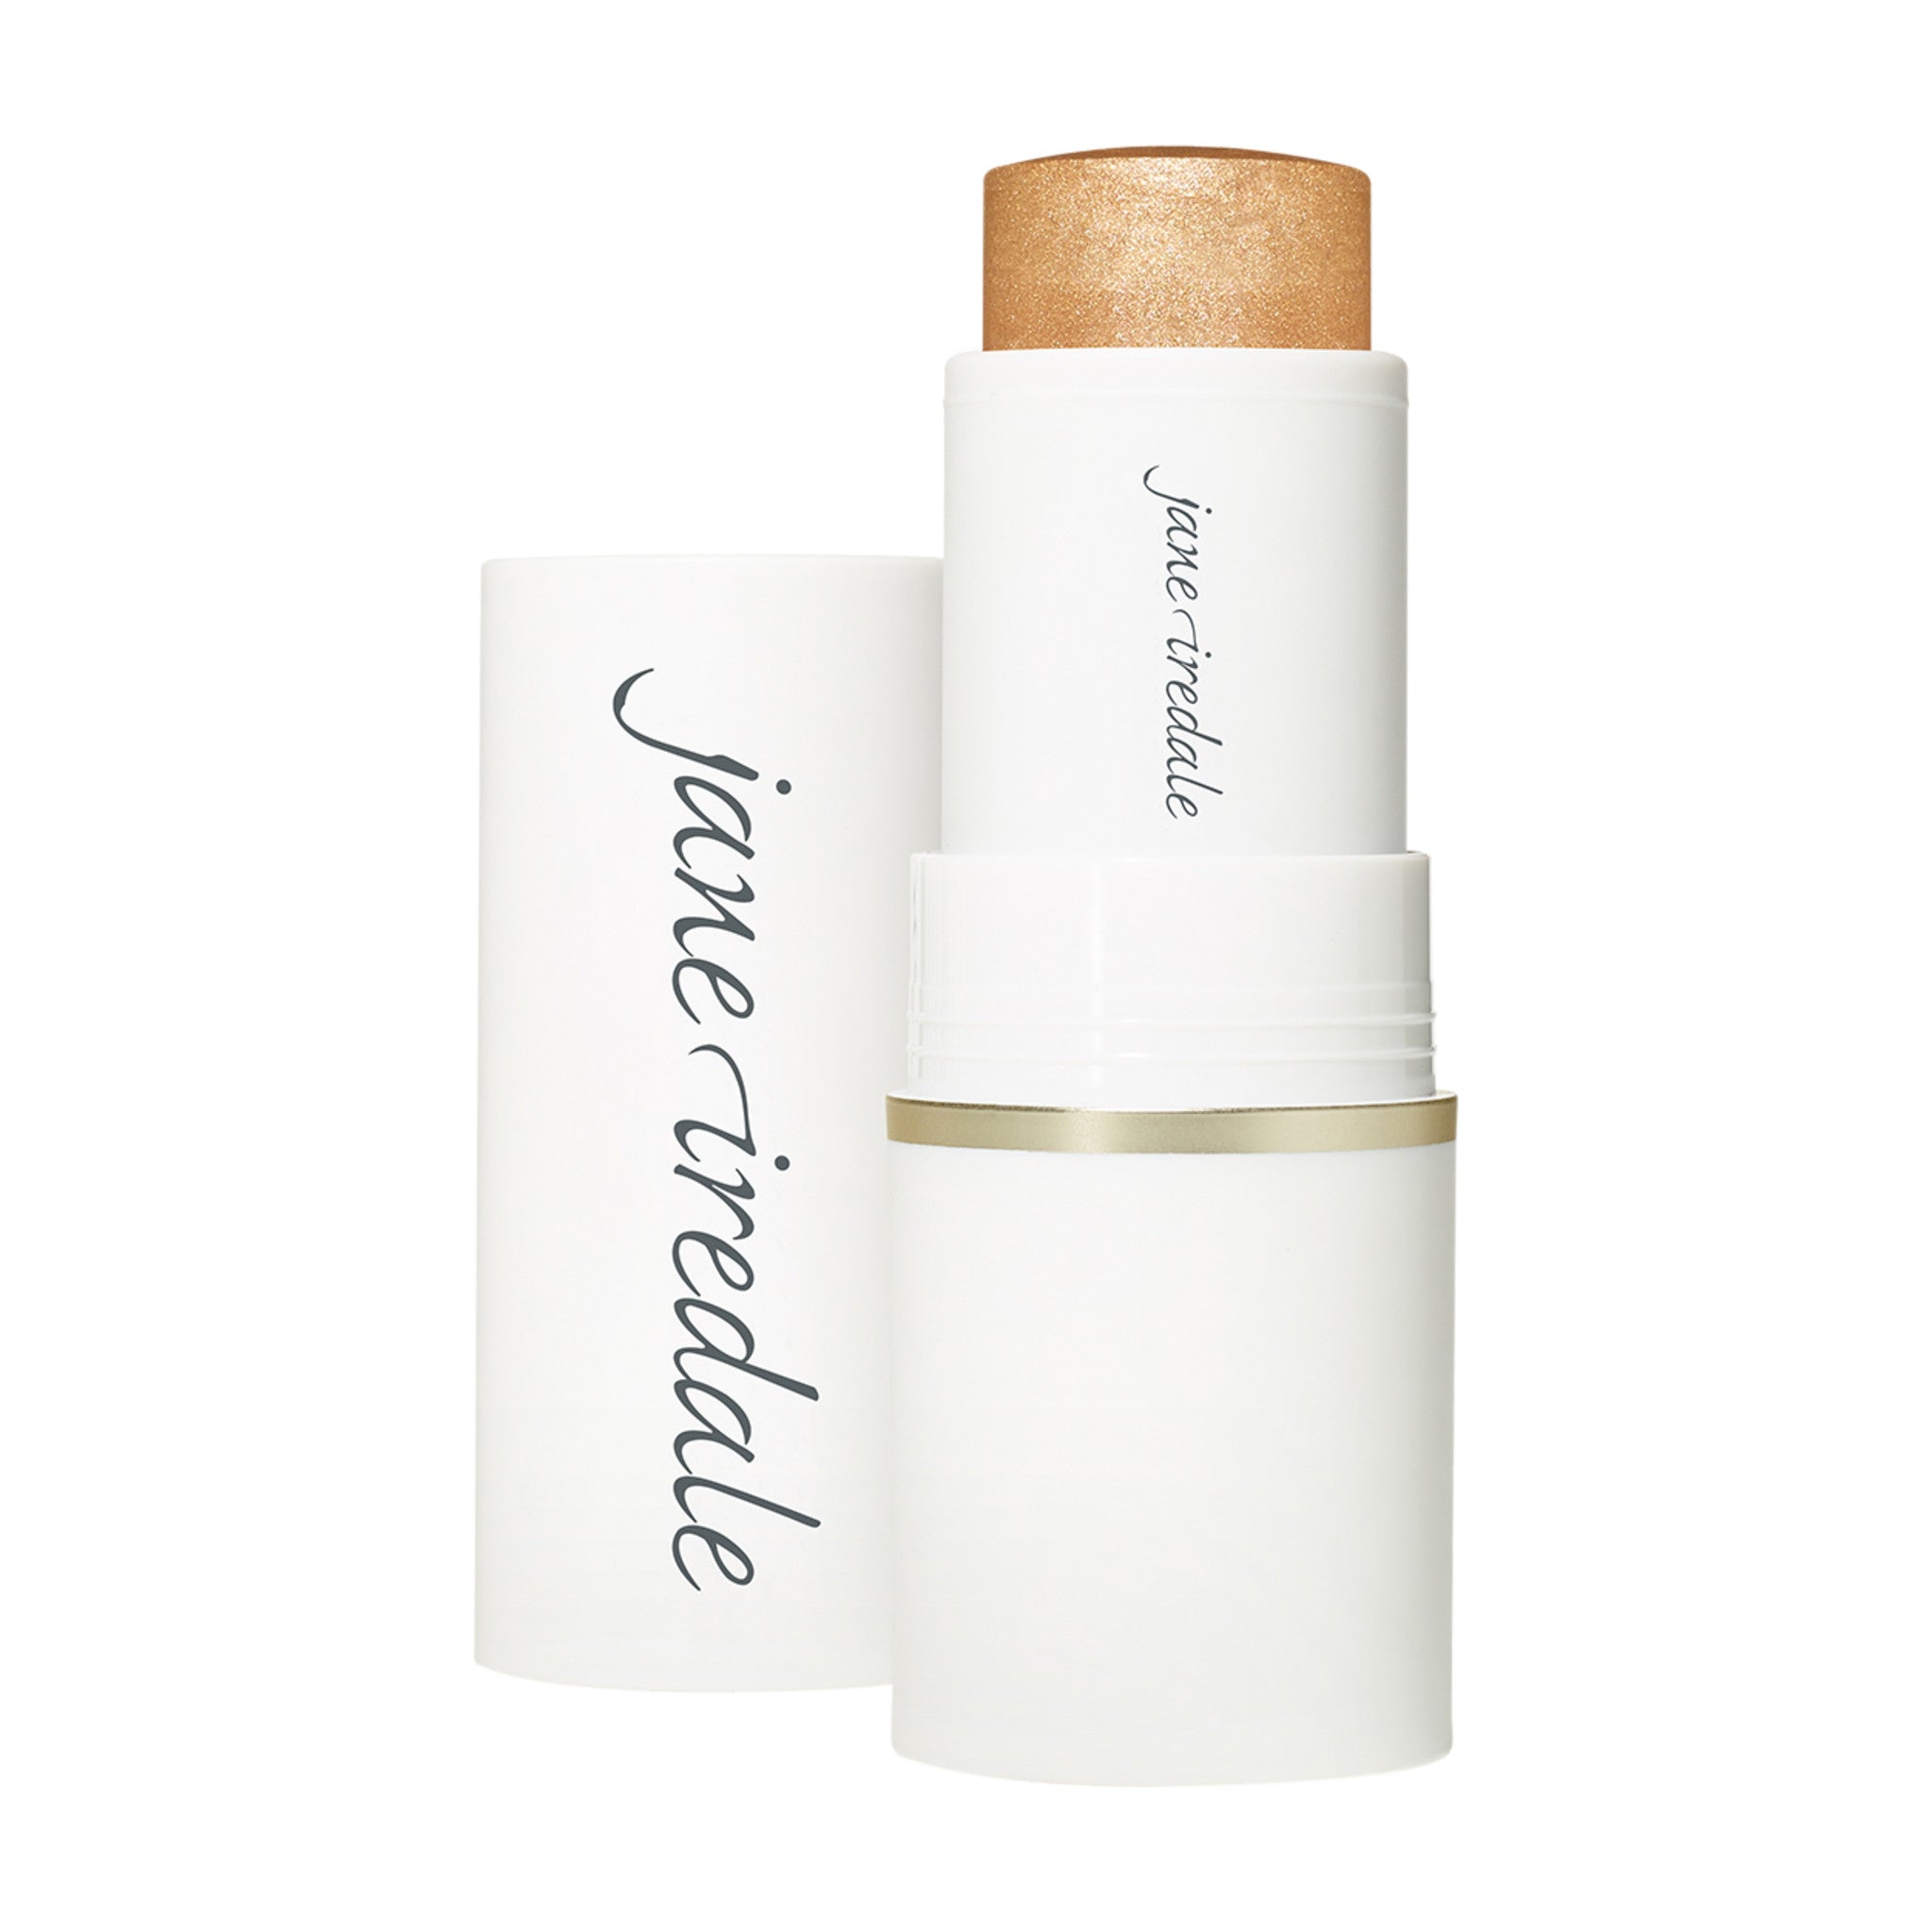 Jane Iredale Glow Time Highlighter Stick Color/Shade variant: Eclipse main image.